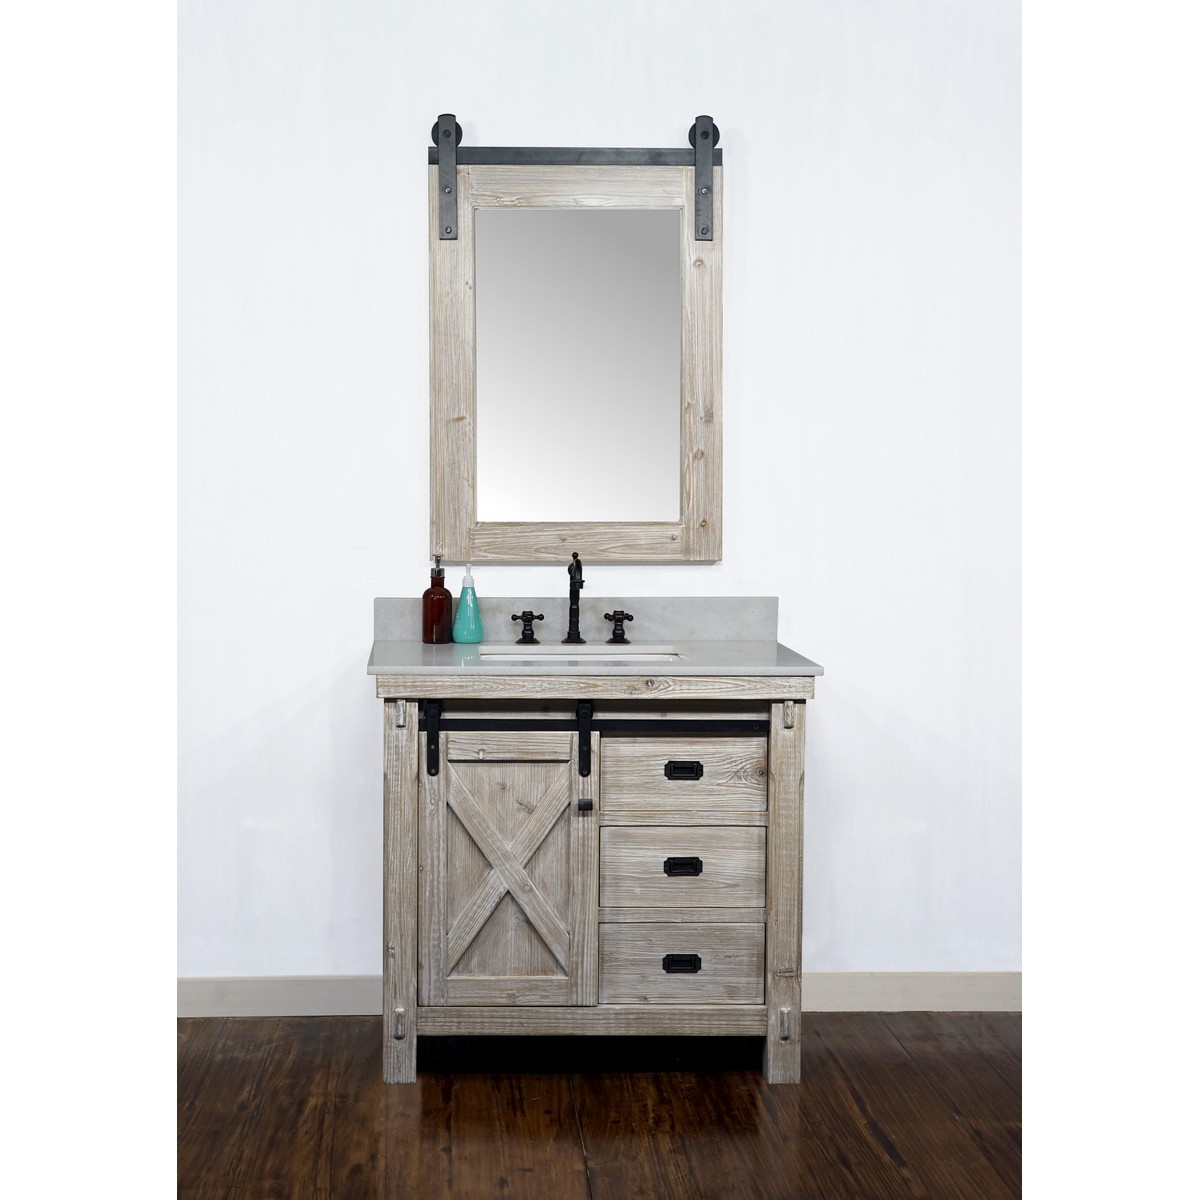 INFURNITURE WK8536+AP TOP 36 INCH RUSTIC SOLID FIR BARN DOOR STYLE SINGLE SINK VANITY WITH ARCTIC PEARL QUARTZ MARBLE TOP-NO FAUCET IN DRIFTWOOD